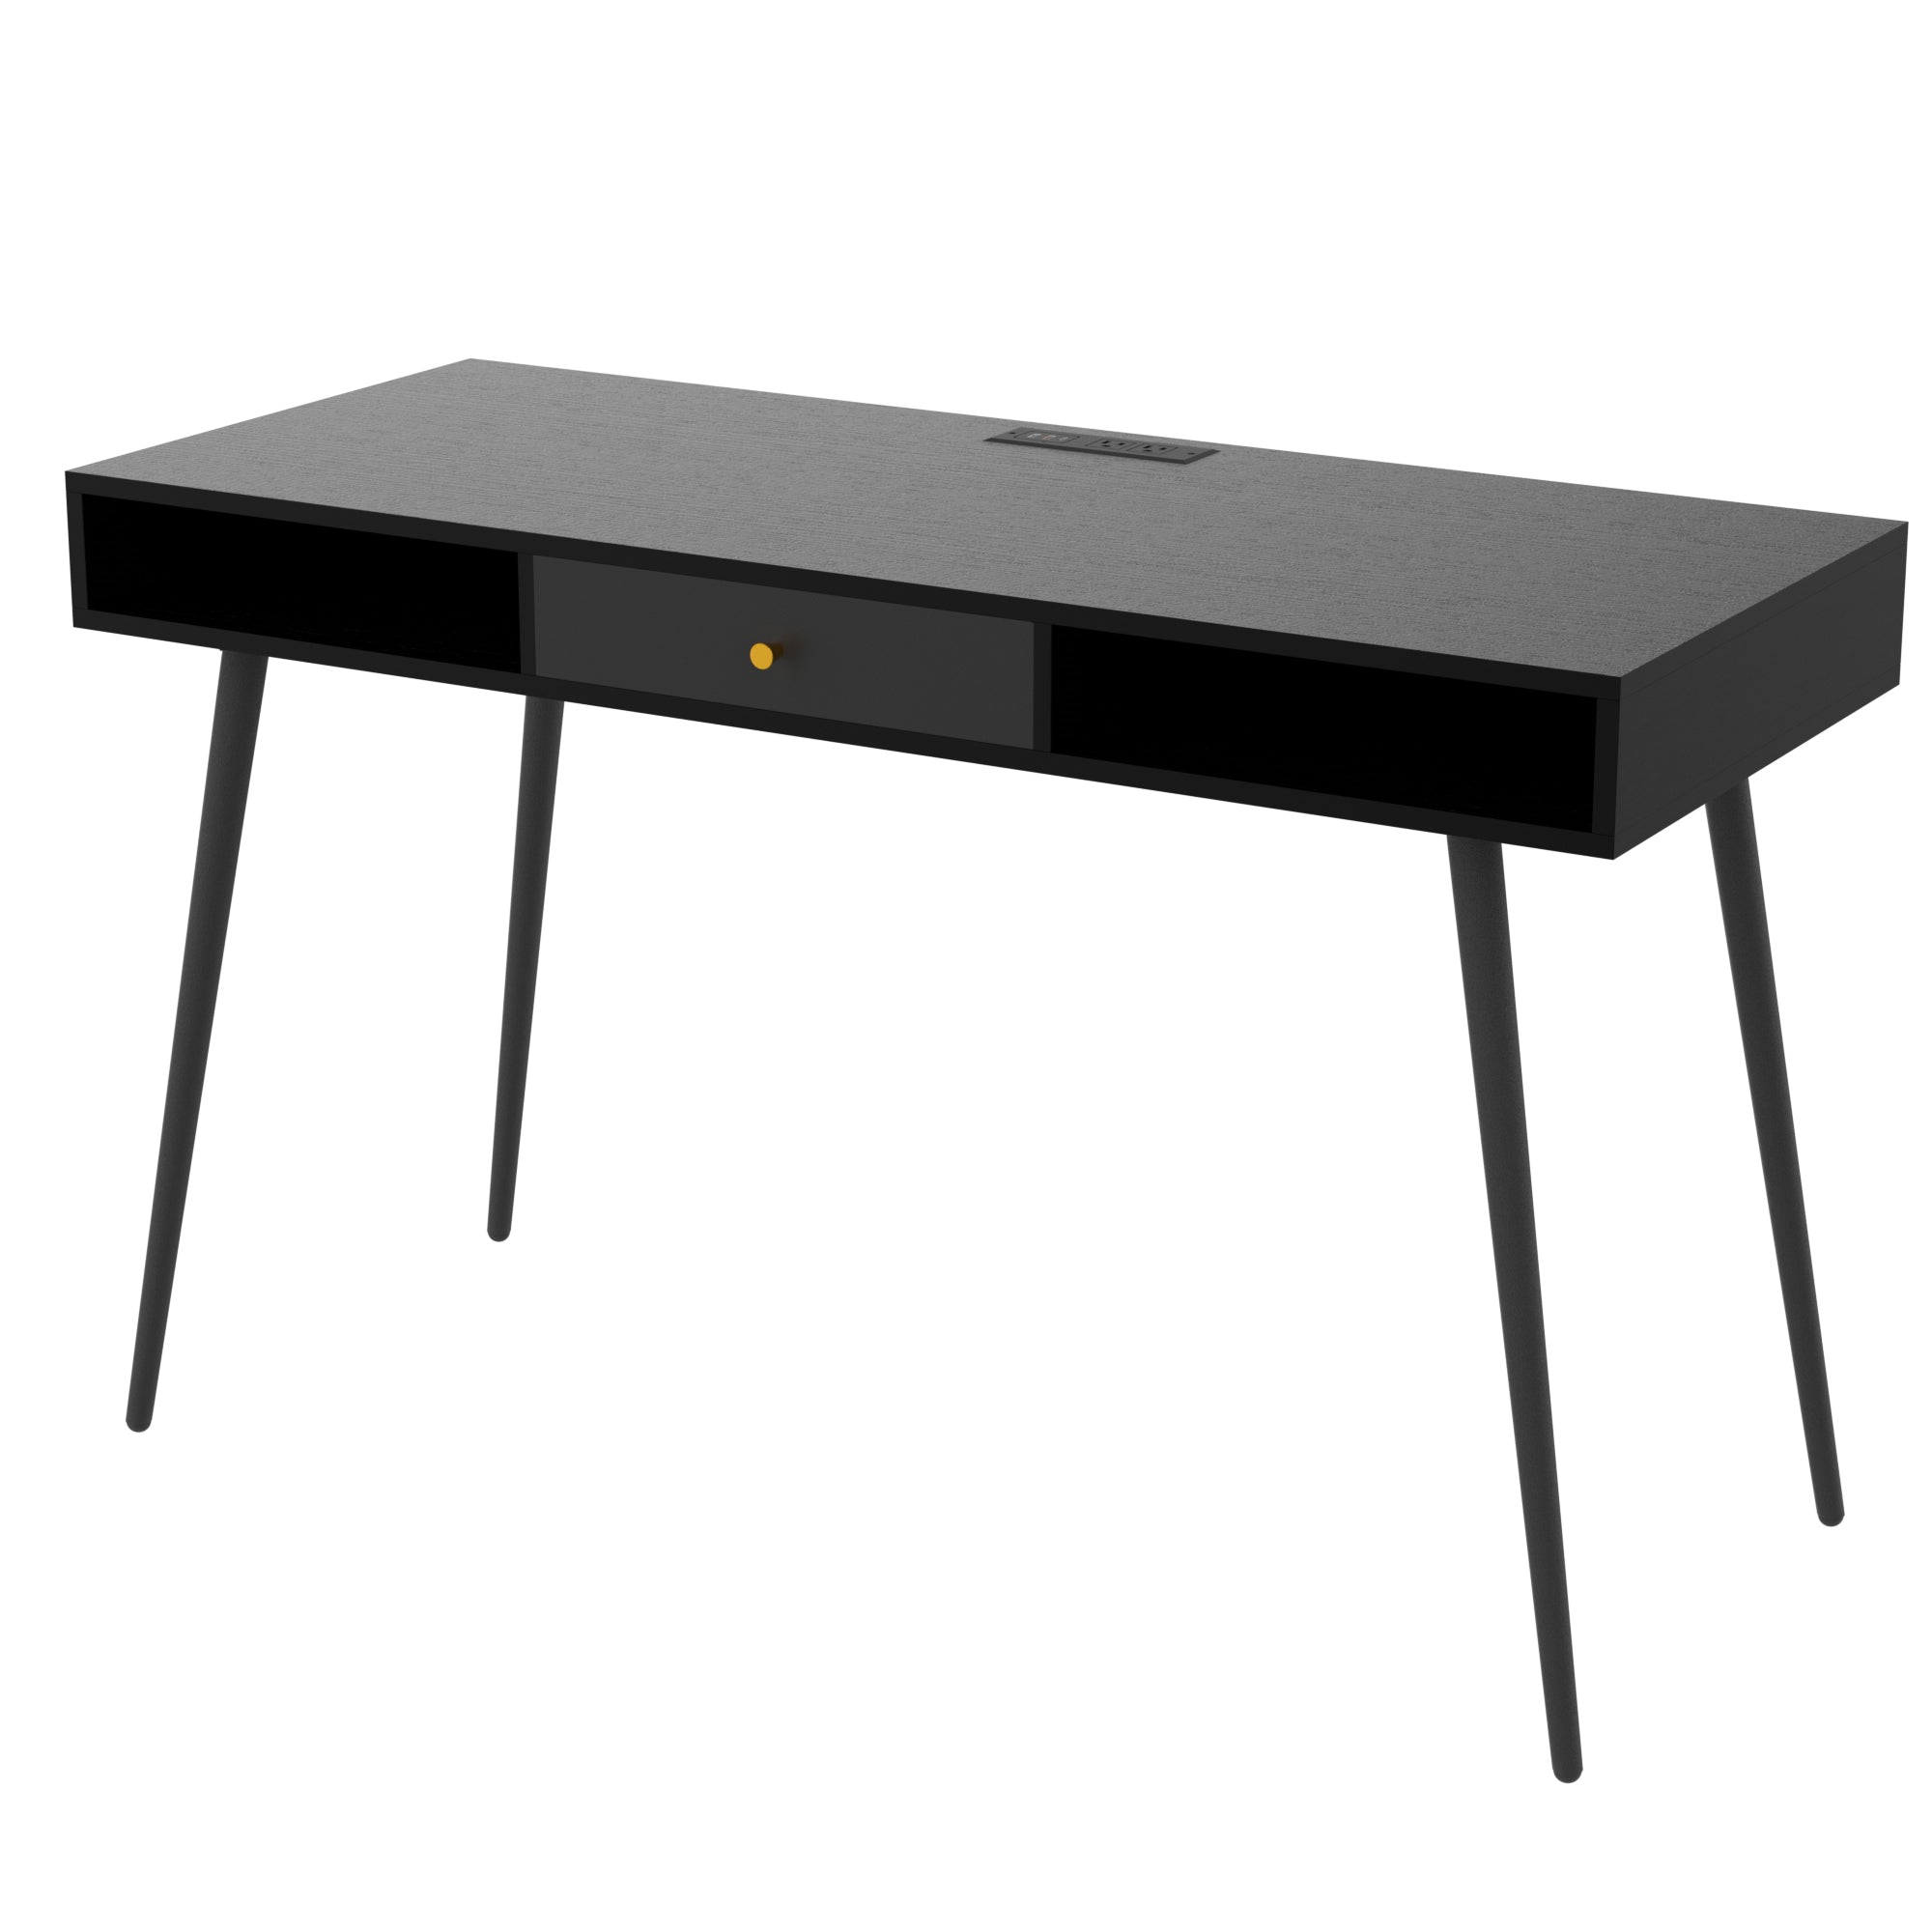 Mid Century Desk with USB Ports and Power Outlet black-mdf